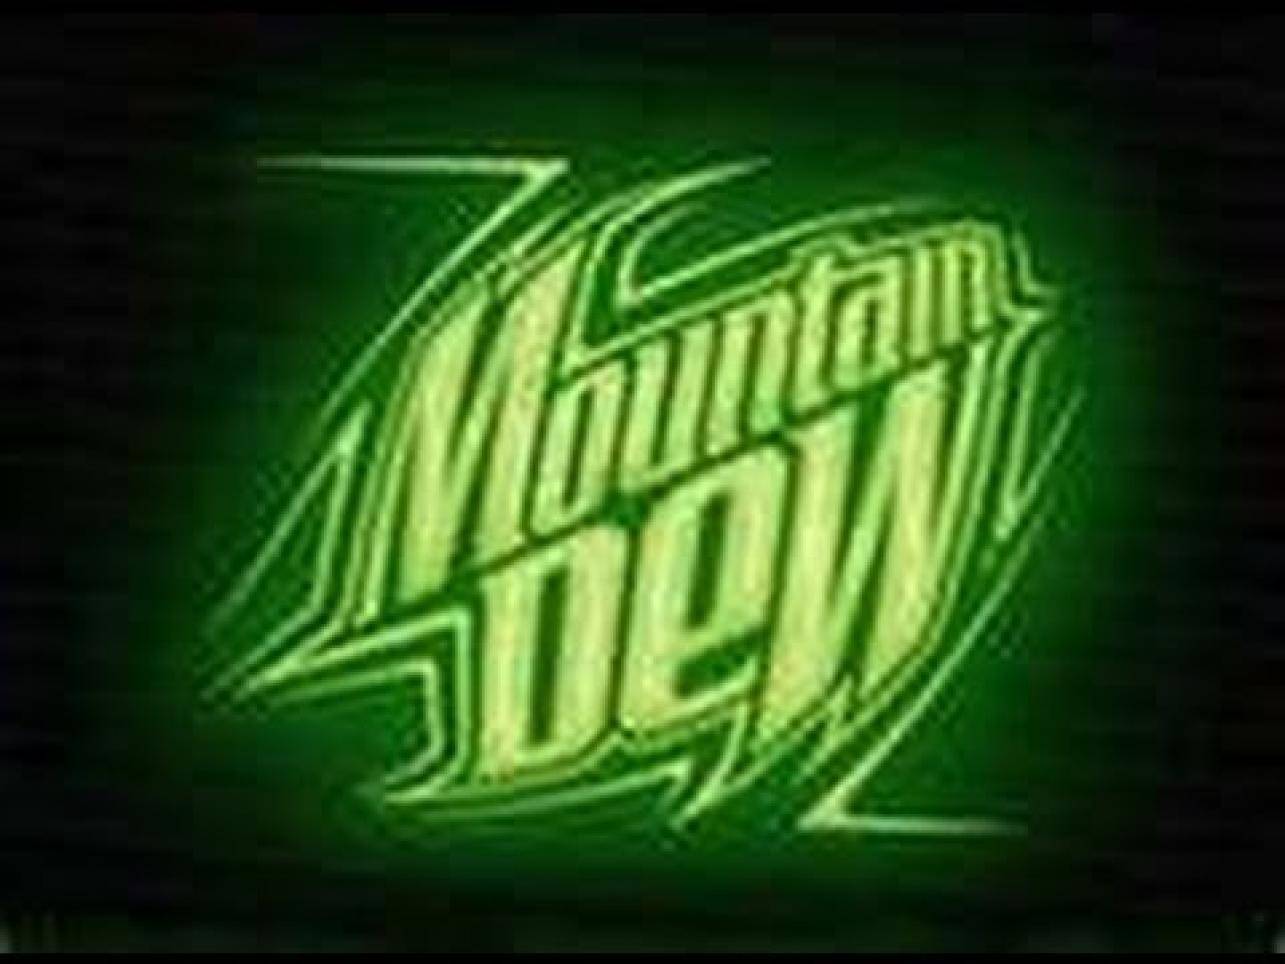 Hard Mountain Dew on X OHIO Our 1 most requested state from  drinkers You asked for it Now get Hard MTN Dew in Ohio  httpstcoeuozdABFQo  X